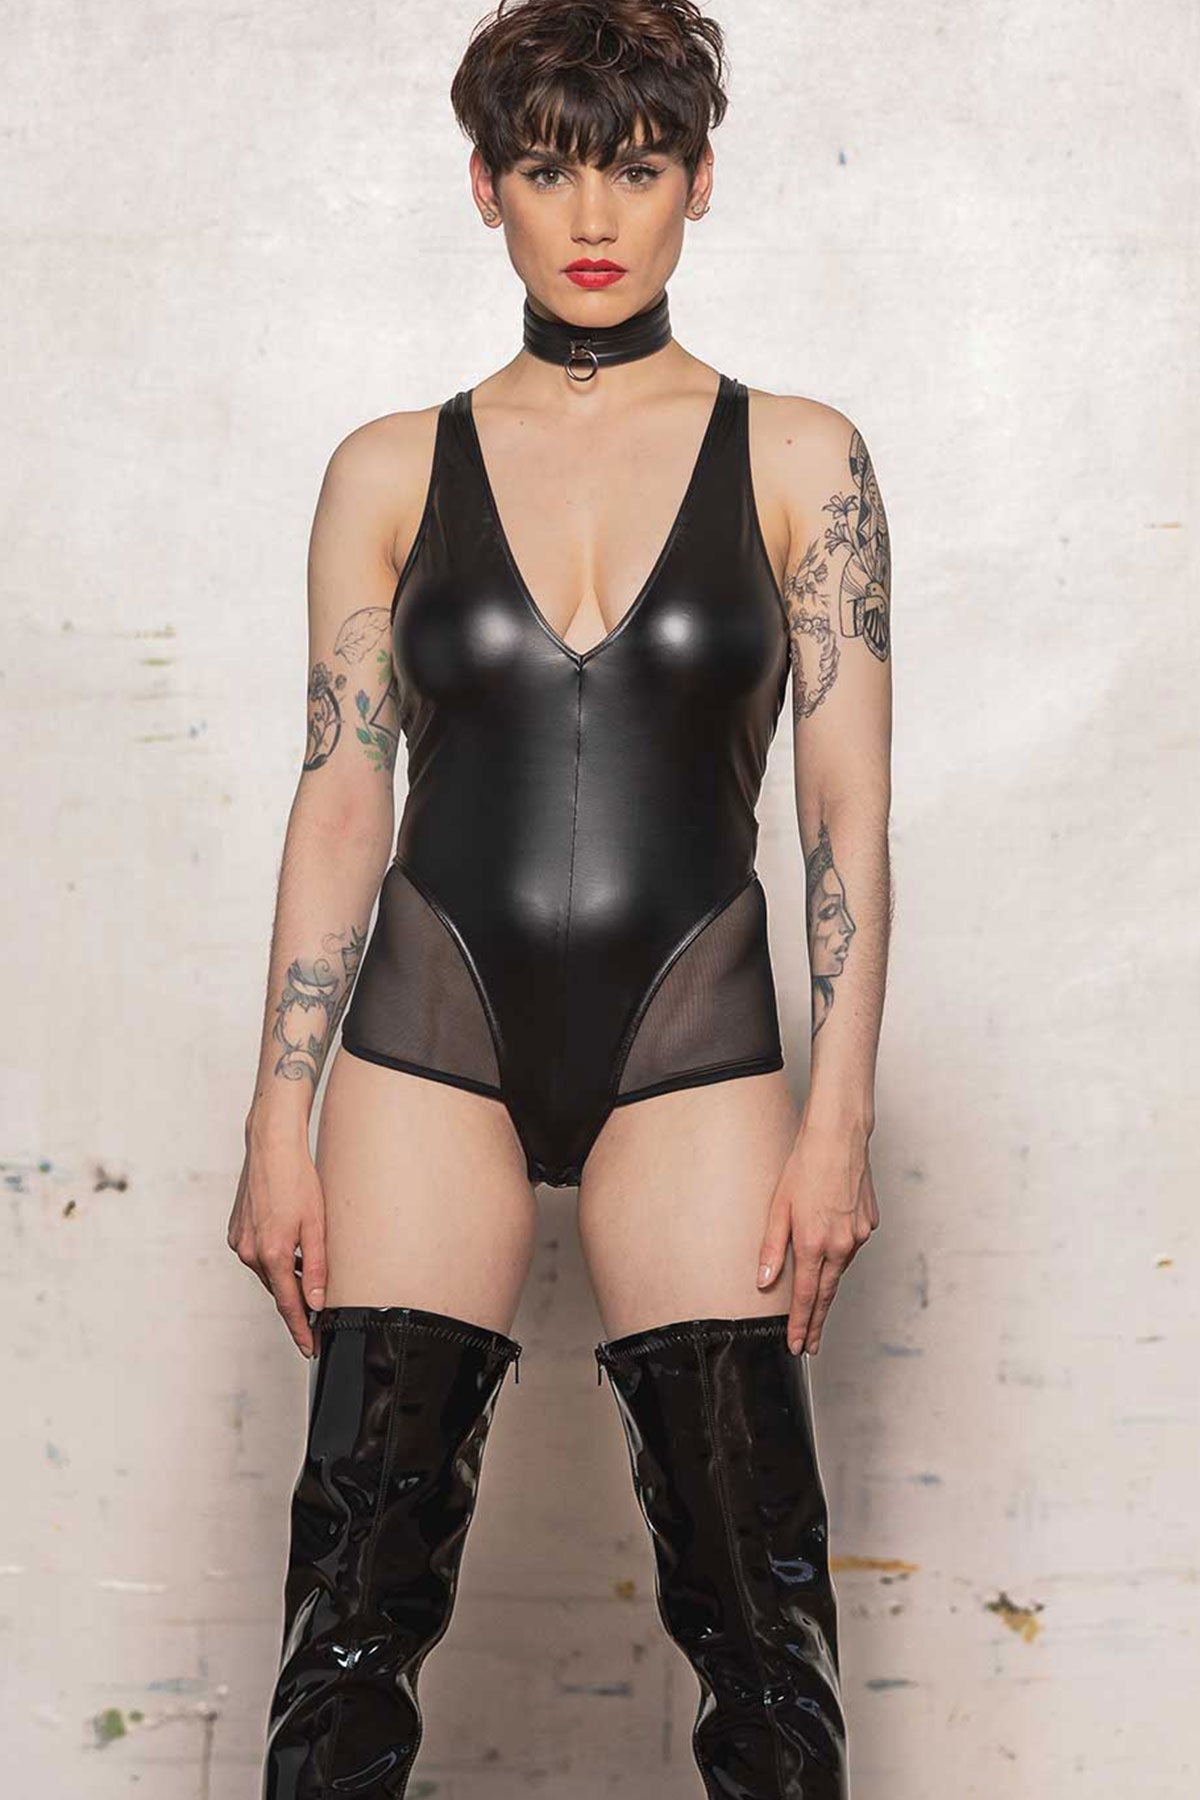 Model wearing the Avalanche PVC and Mesh Playsuit with PVC thigh high boots, front view.